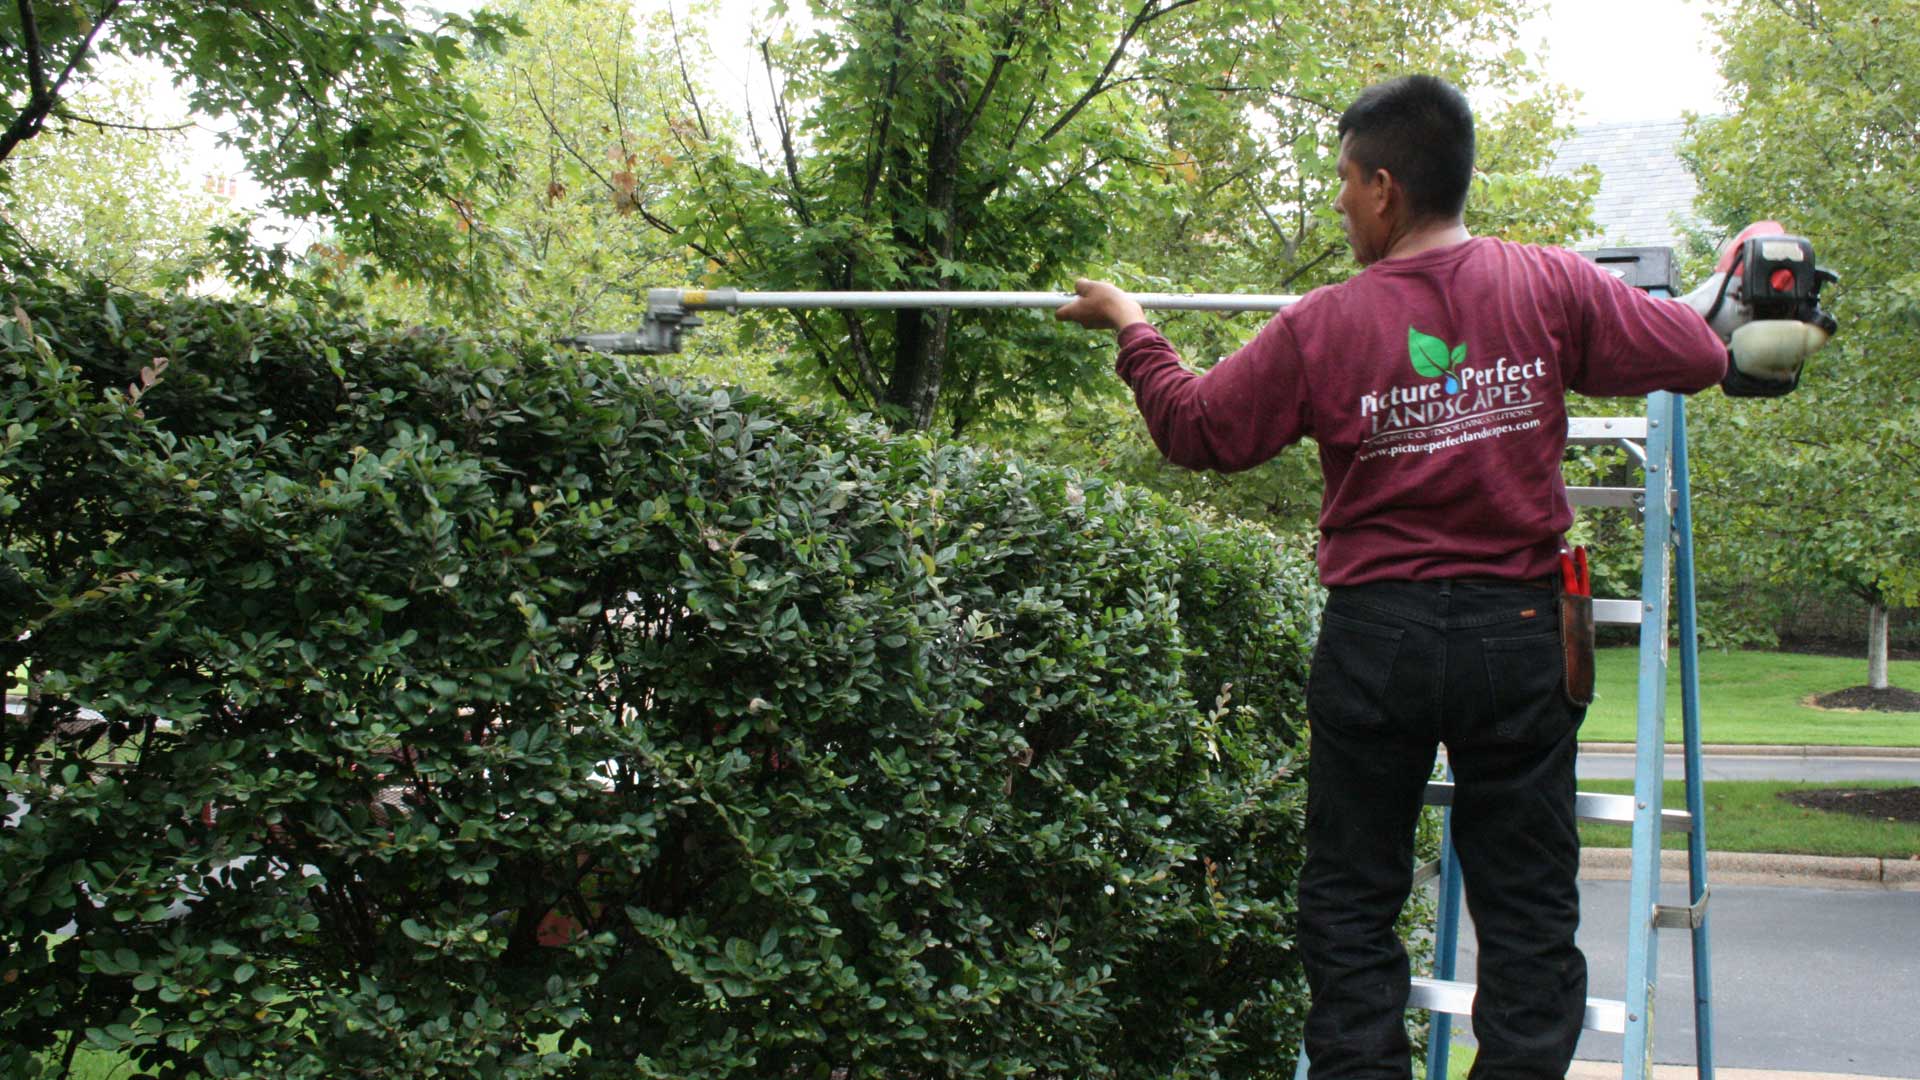 Want Healthy & Beautiful Plants? Make Sure They’re Trimmed & Pruned!